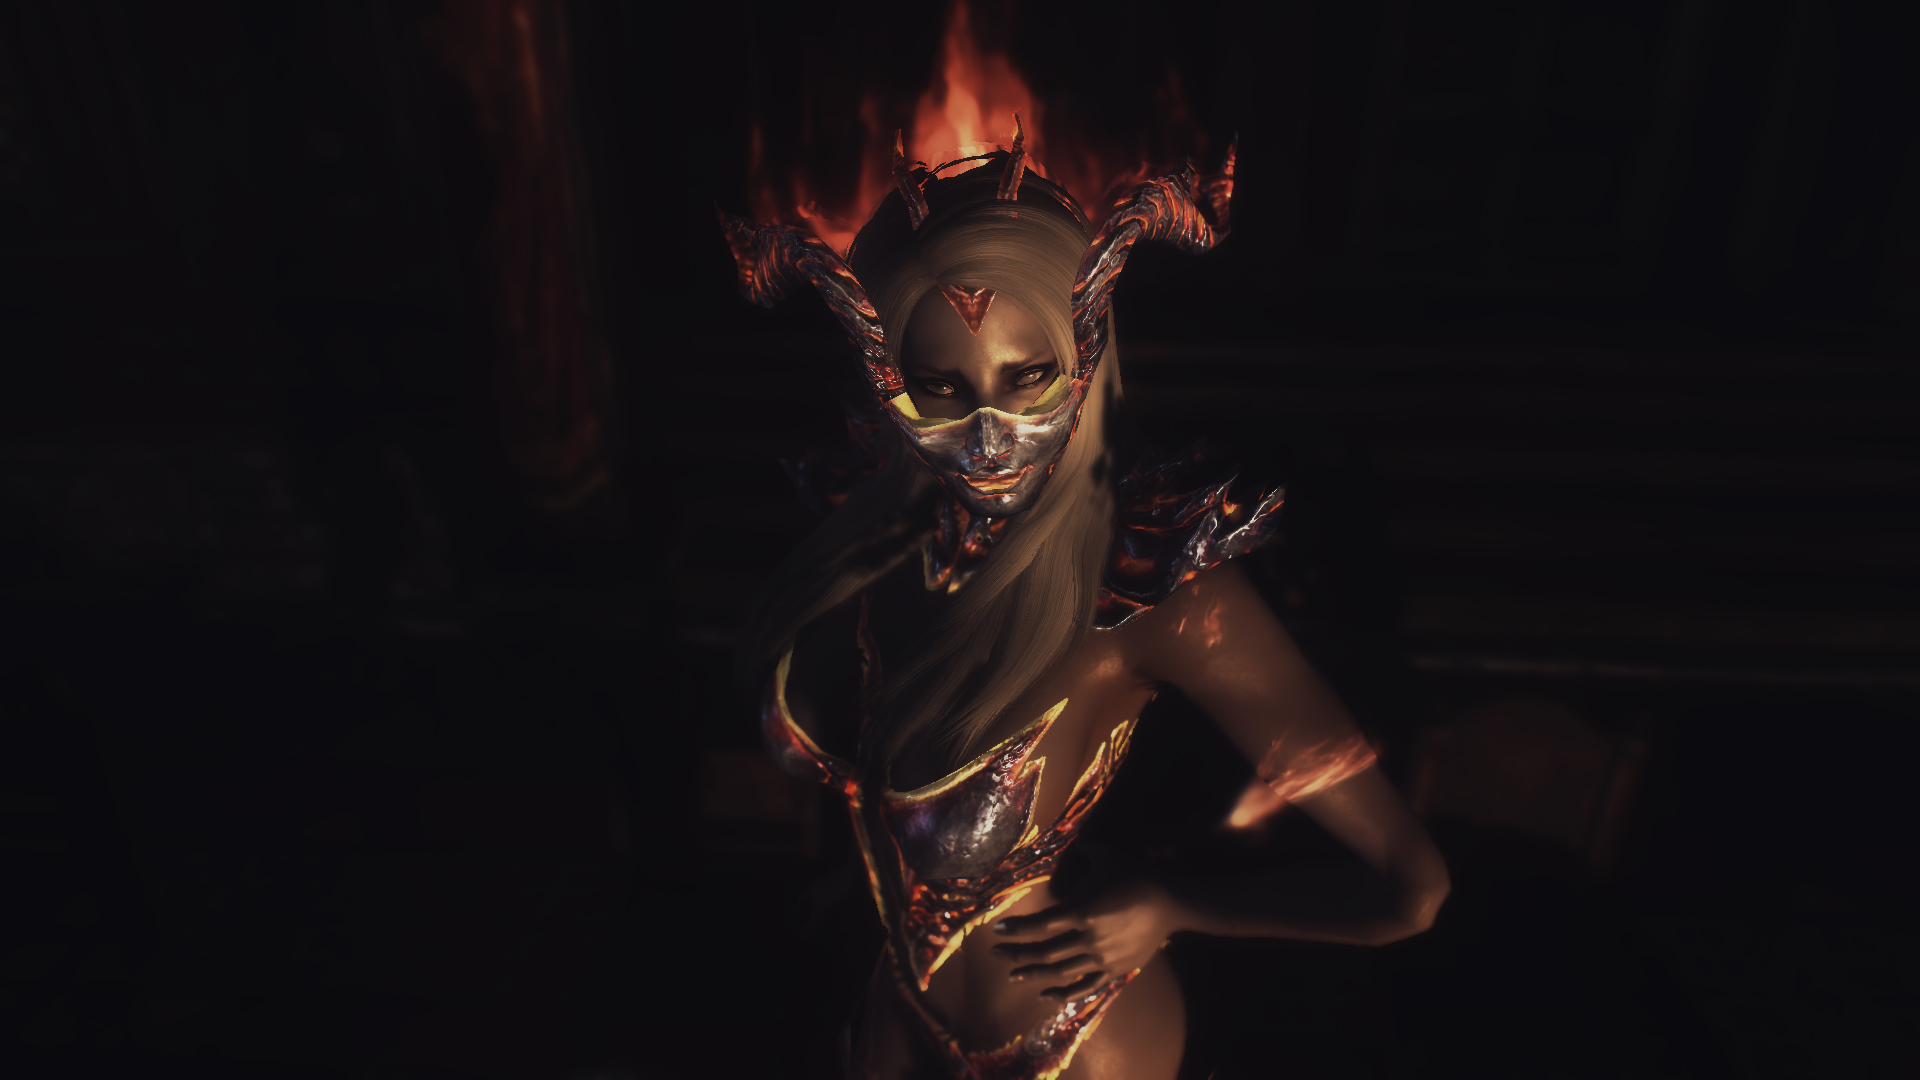 MissShazira 2012-09-11 02:28 Version:2.2. ☆. Flame Atronach With Silver And...